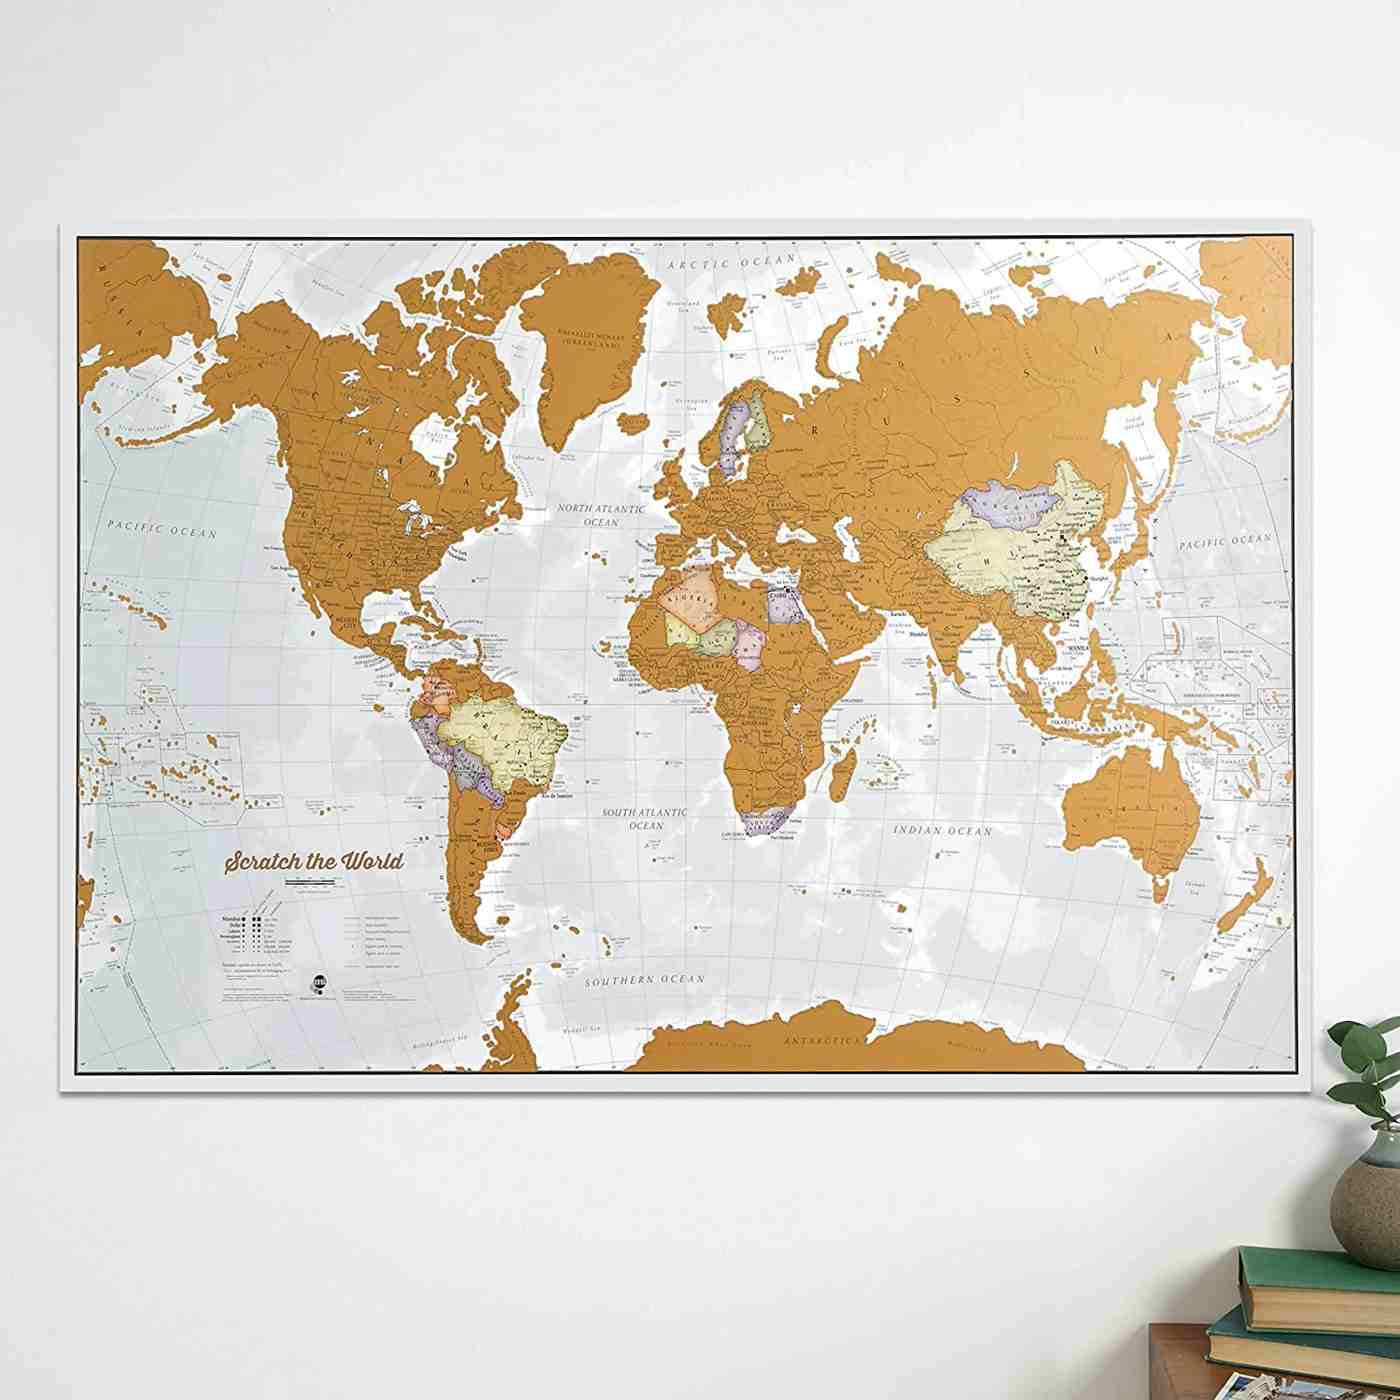 Make a world map as a ruble card as a gift for travel lovers